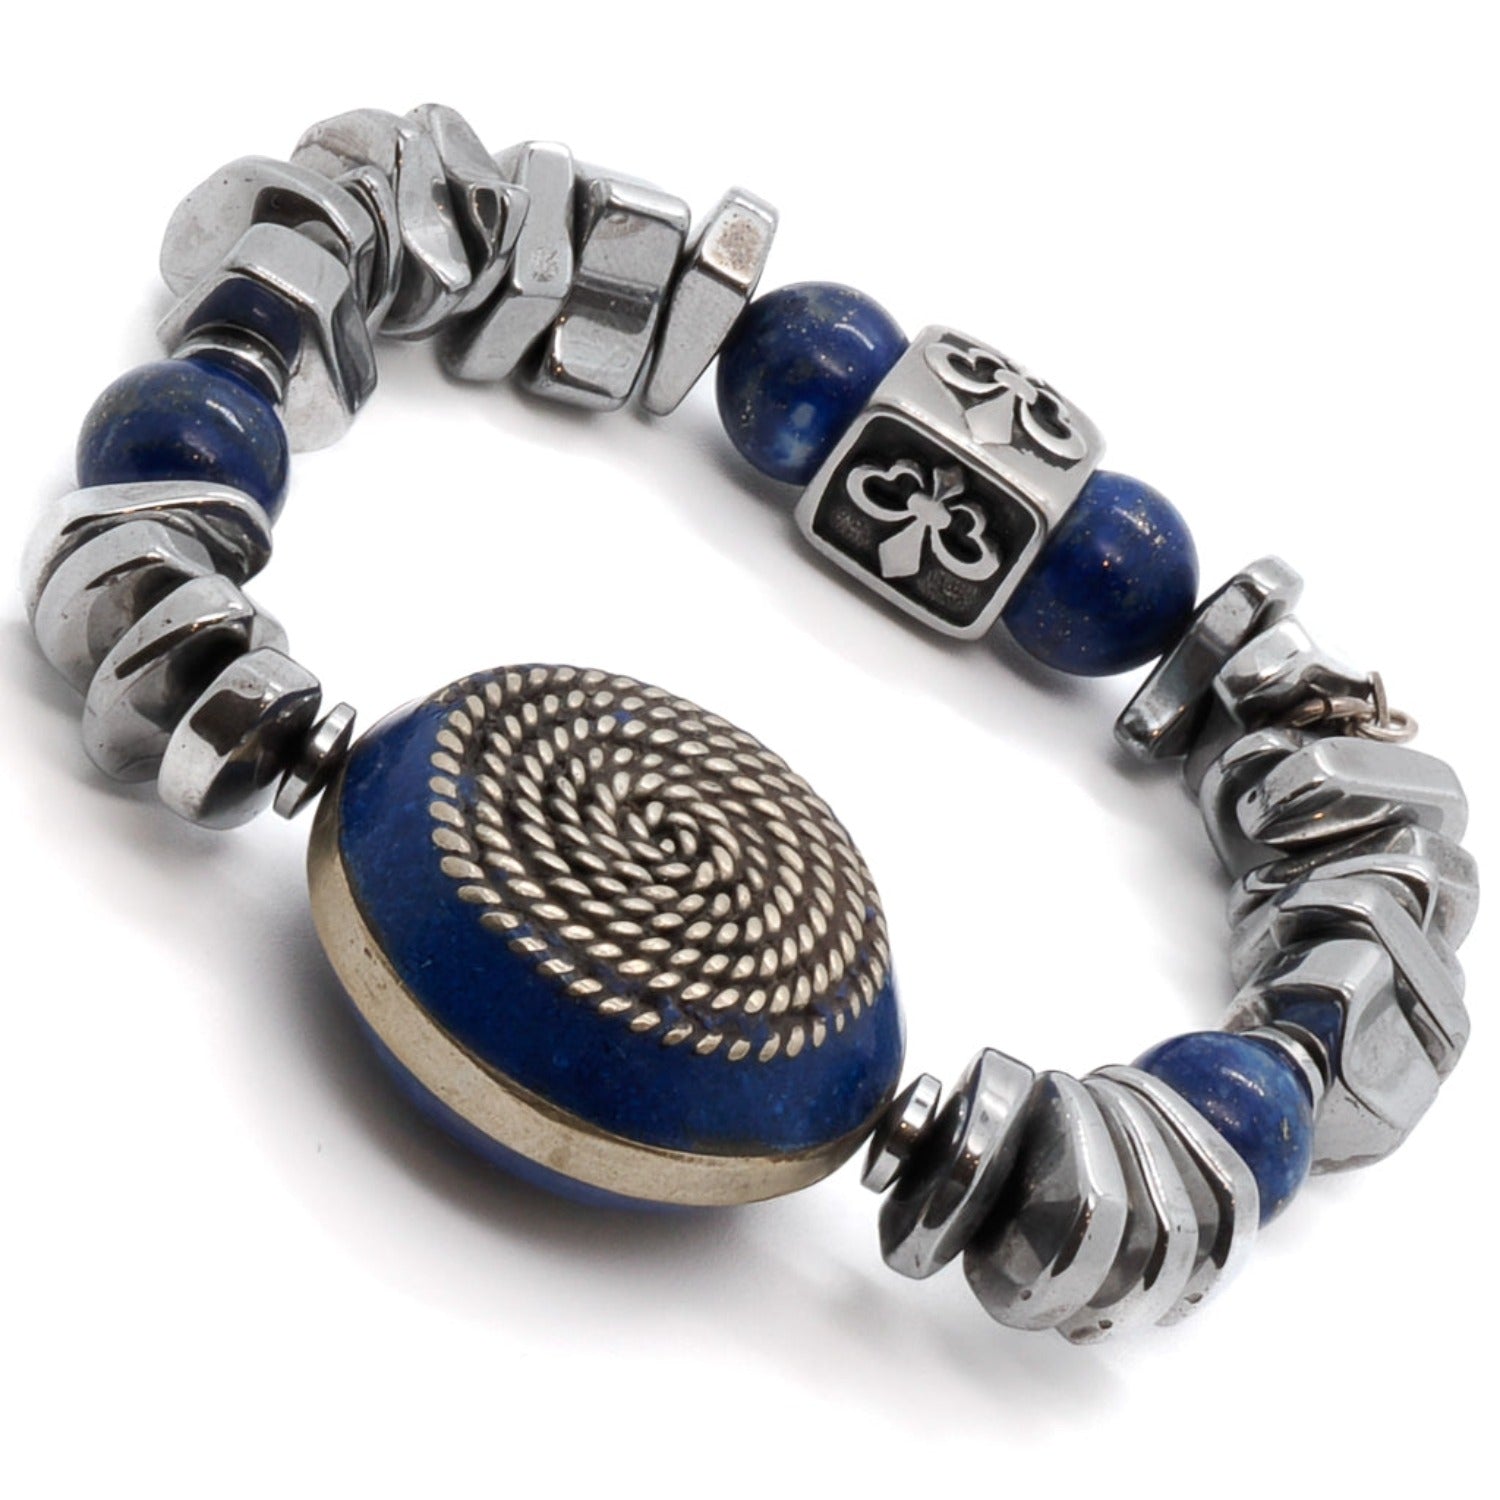 Discover the empowering symbolism of the Strong Women Bracelet, featuring a Nepal silver spiral large bead with lapis lazuli inlay and a Fleur De Li sterling silver bead.